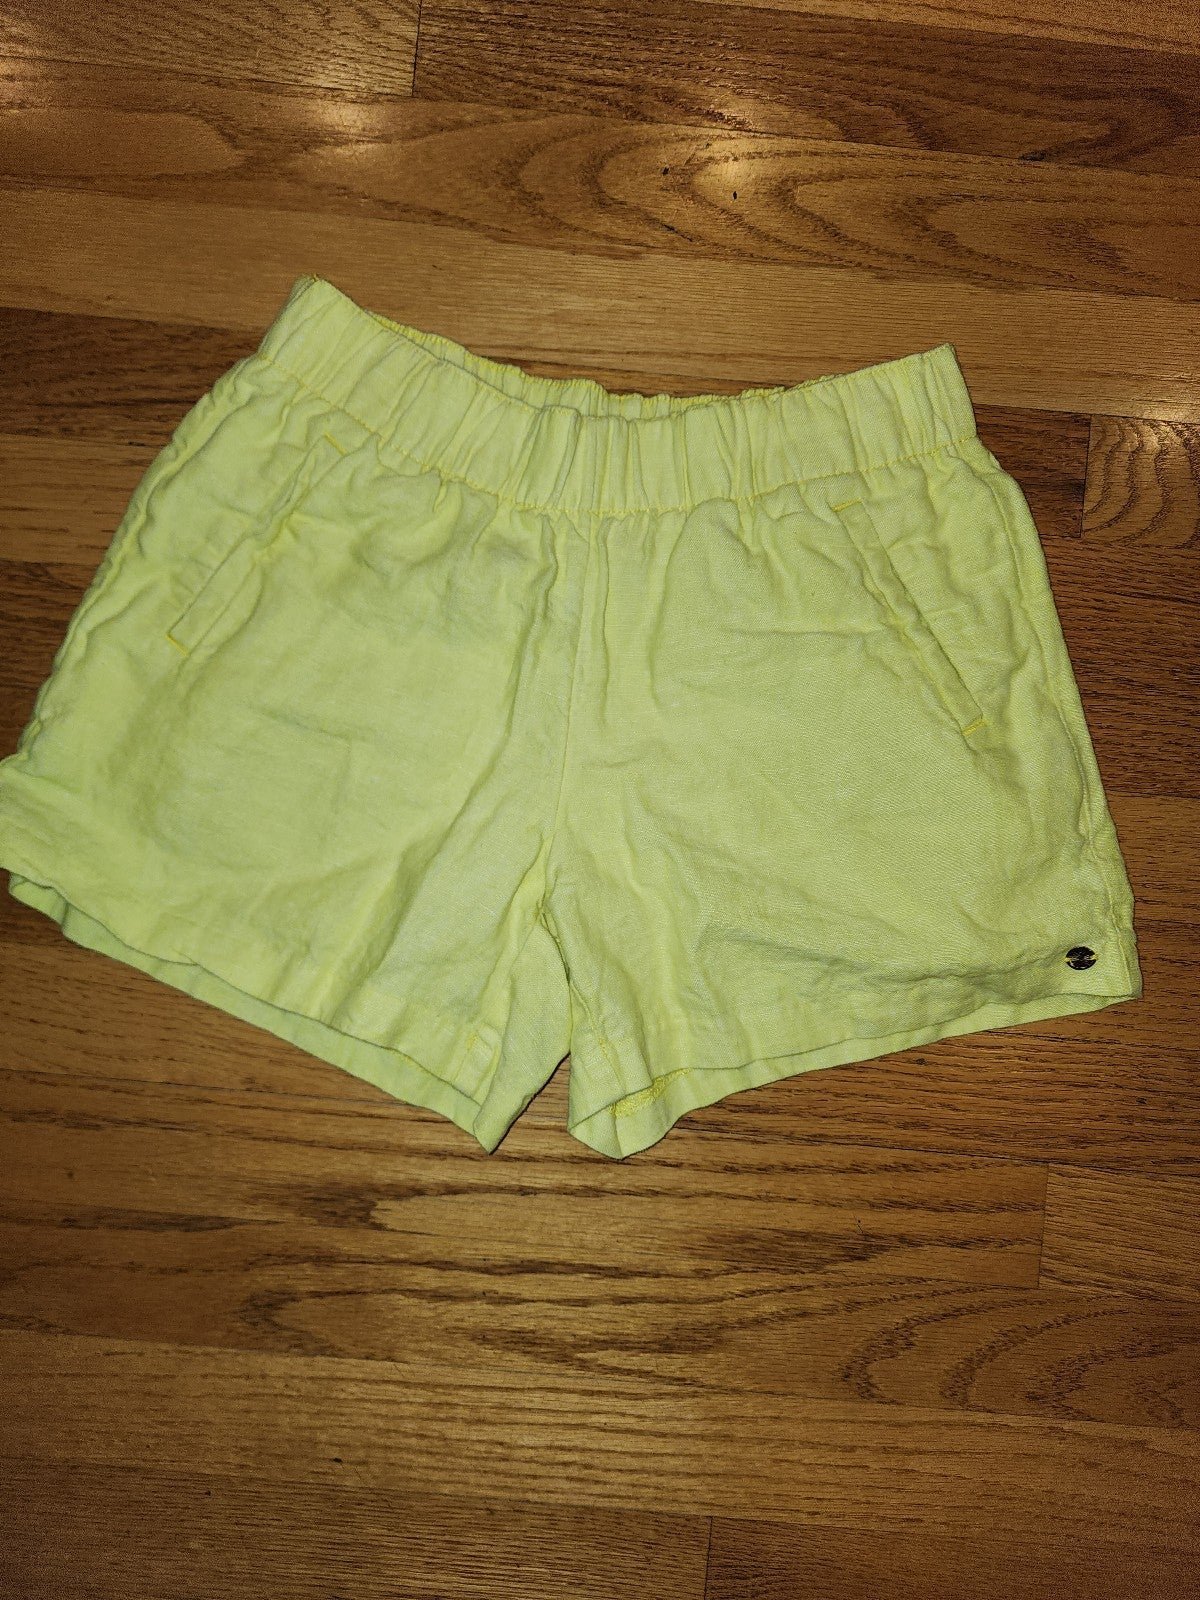 floor price Lilly Pulitzer Yellow Shorts Womens sz XS lSdJBmf9V Outlet Store